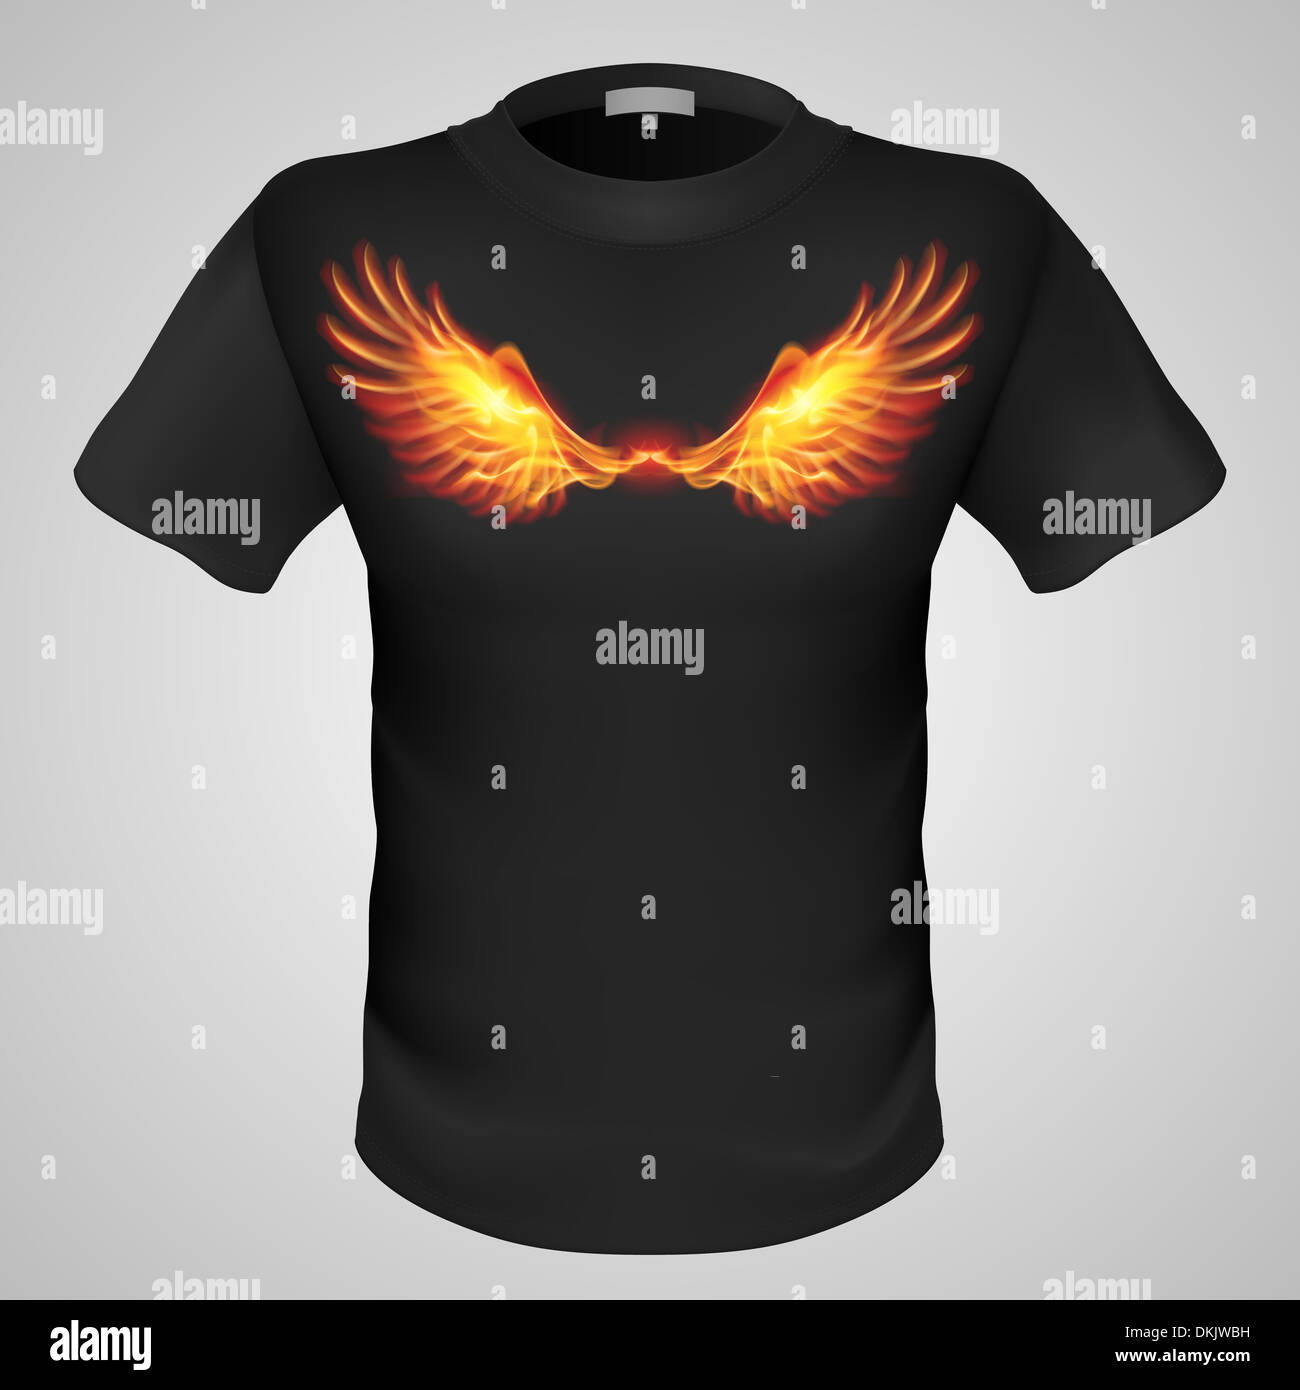 Black male t-shirt with fiery wings print on grey background. Stock Photo